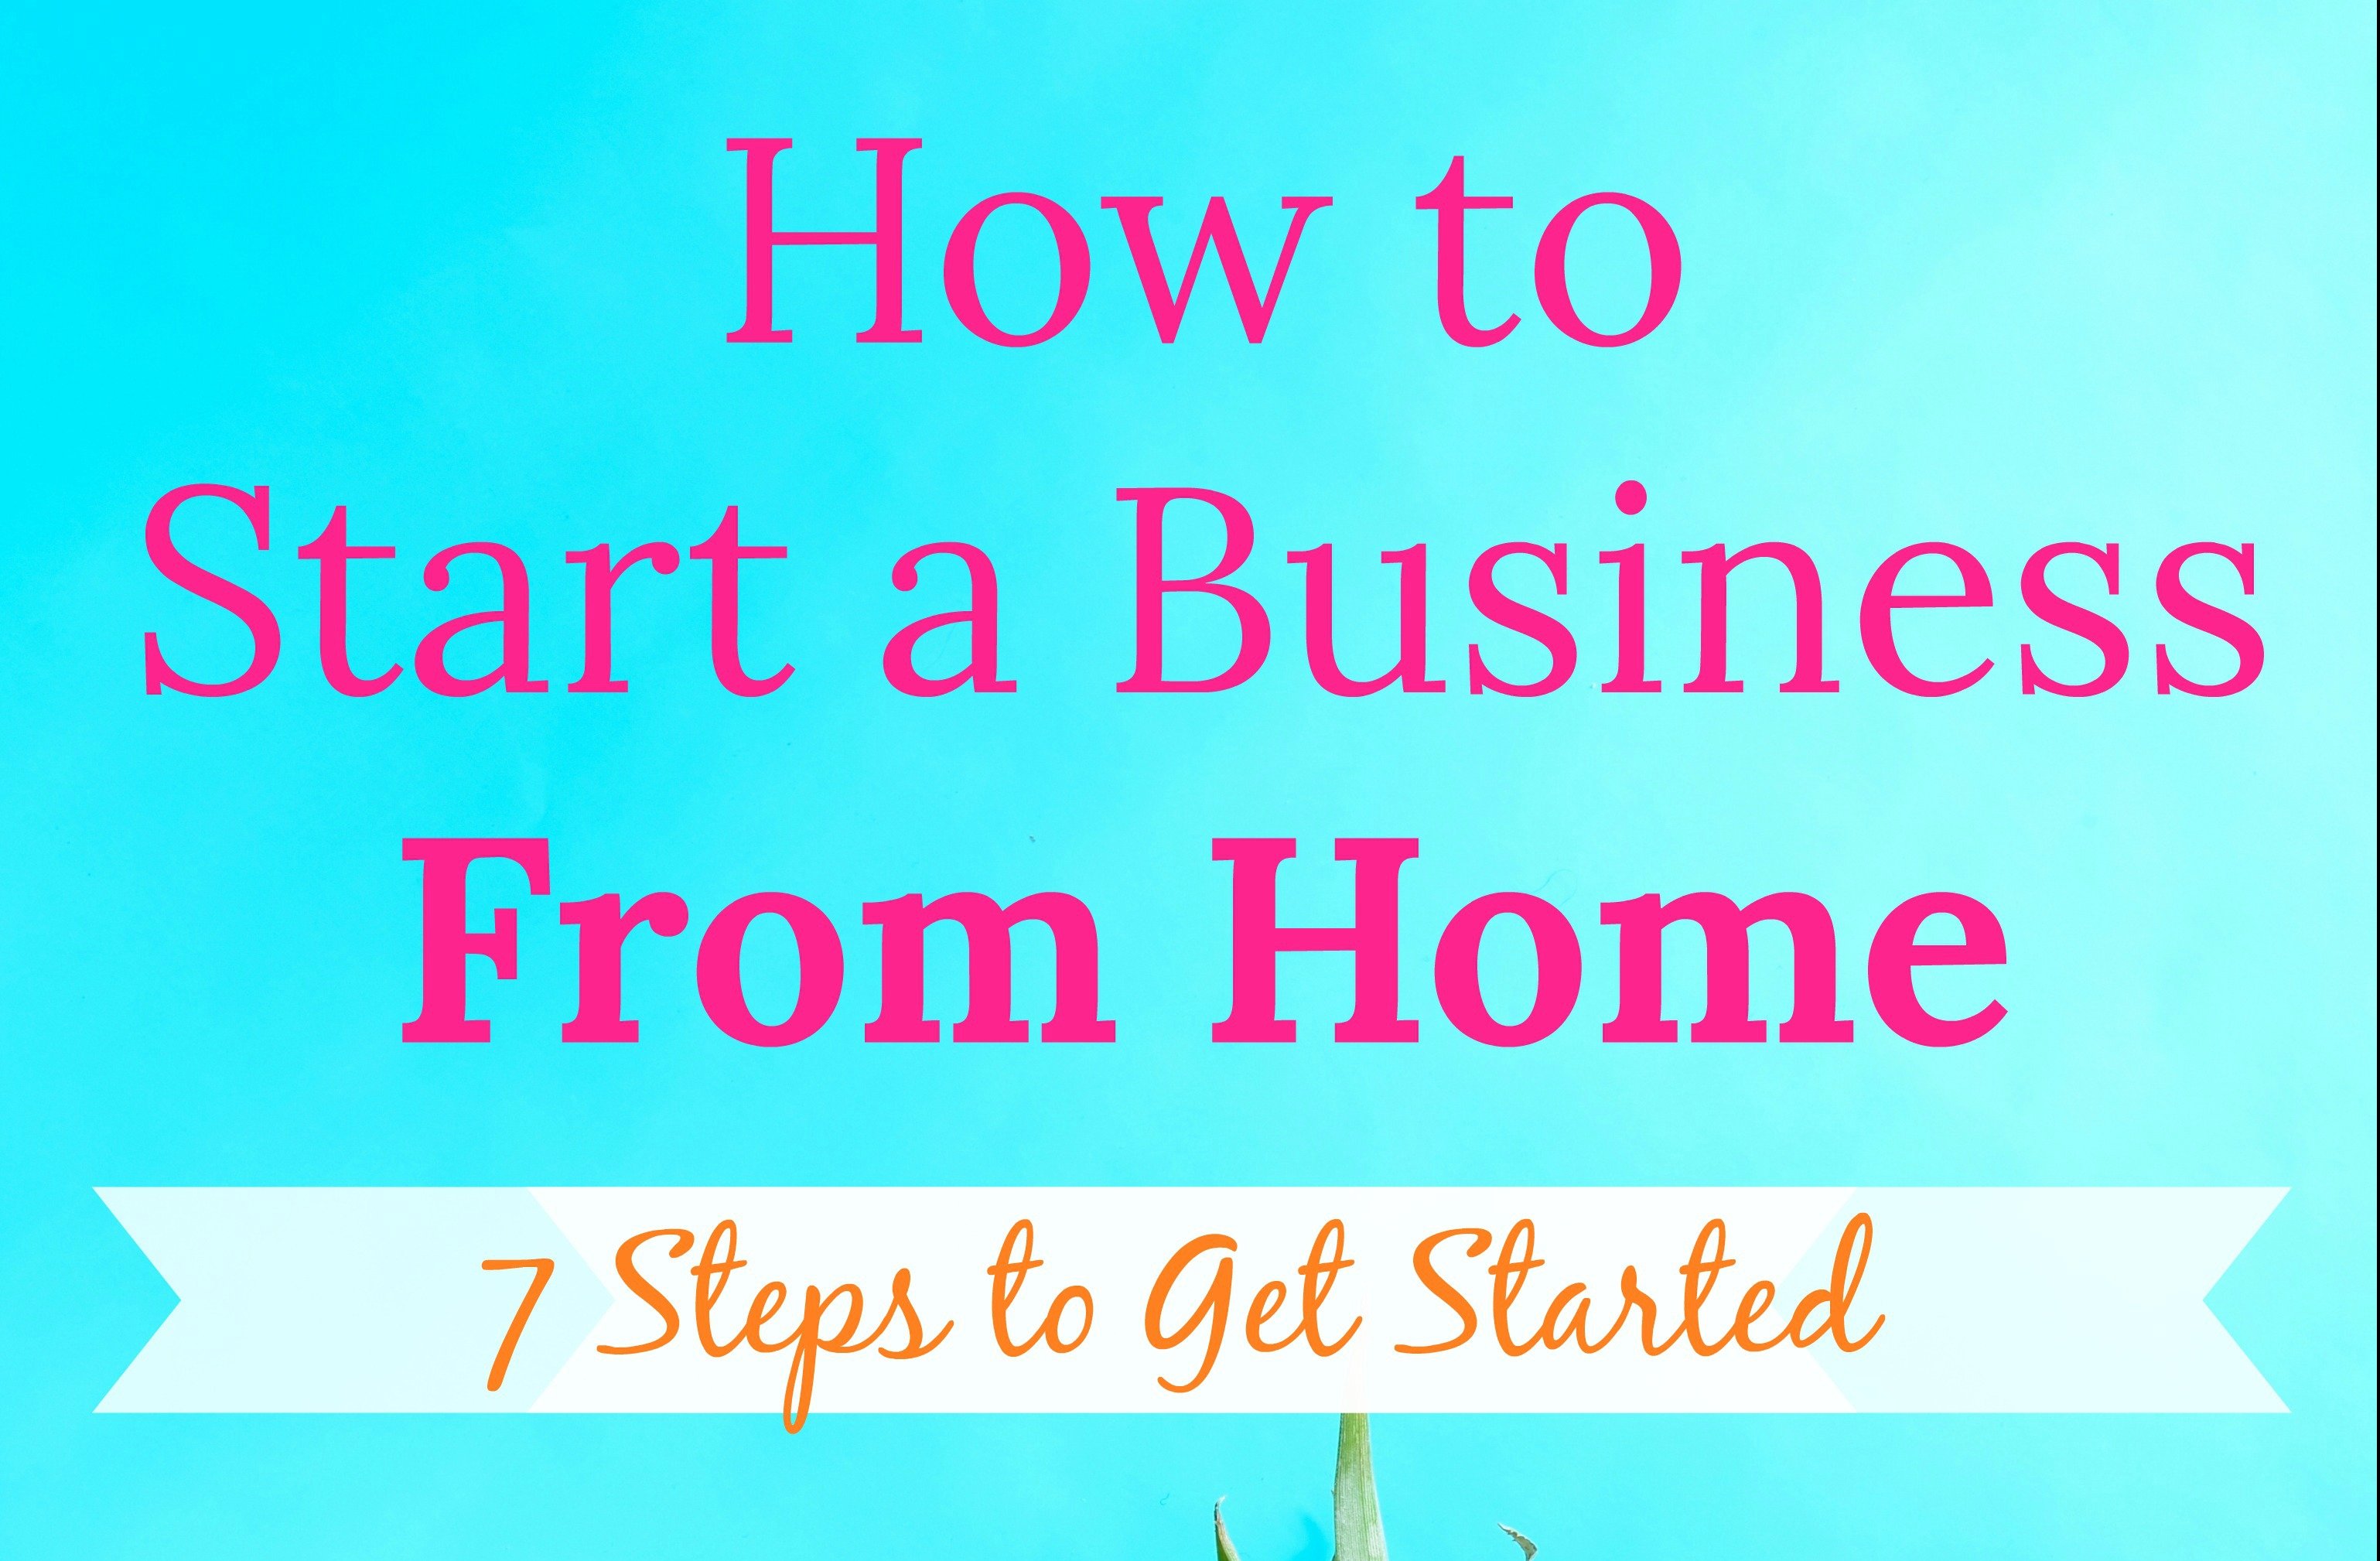 Two pineapples sit on a pink and blue background. Text across the top of the image says "How to Start a Business from Home: 7 Steps to Get Started"